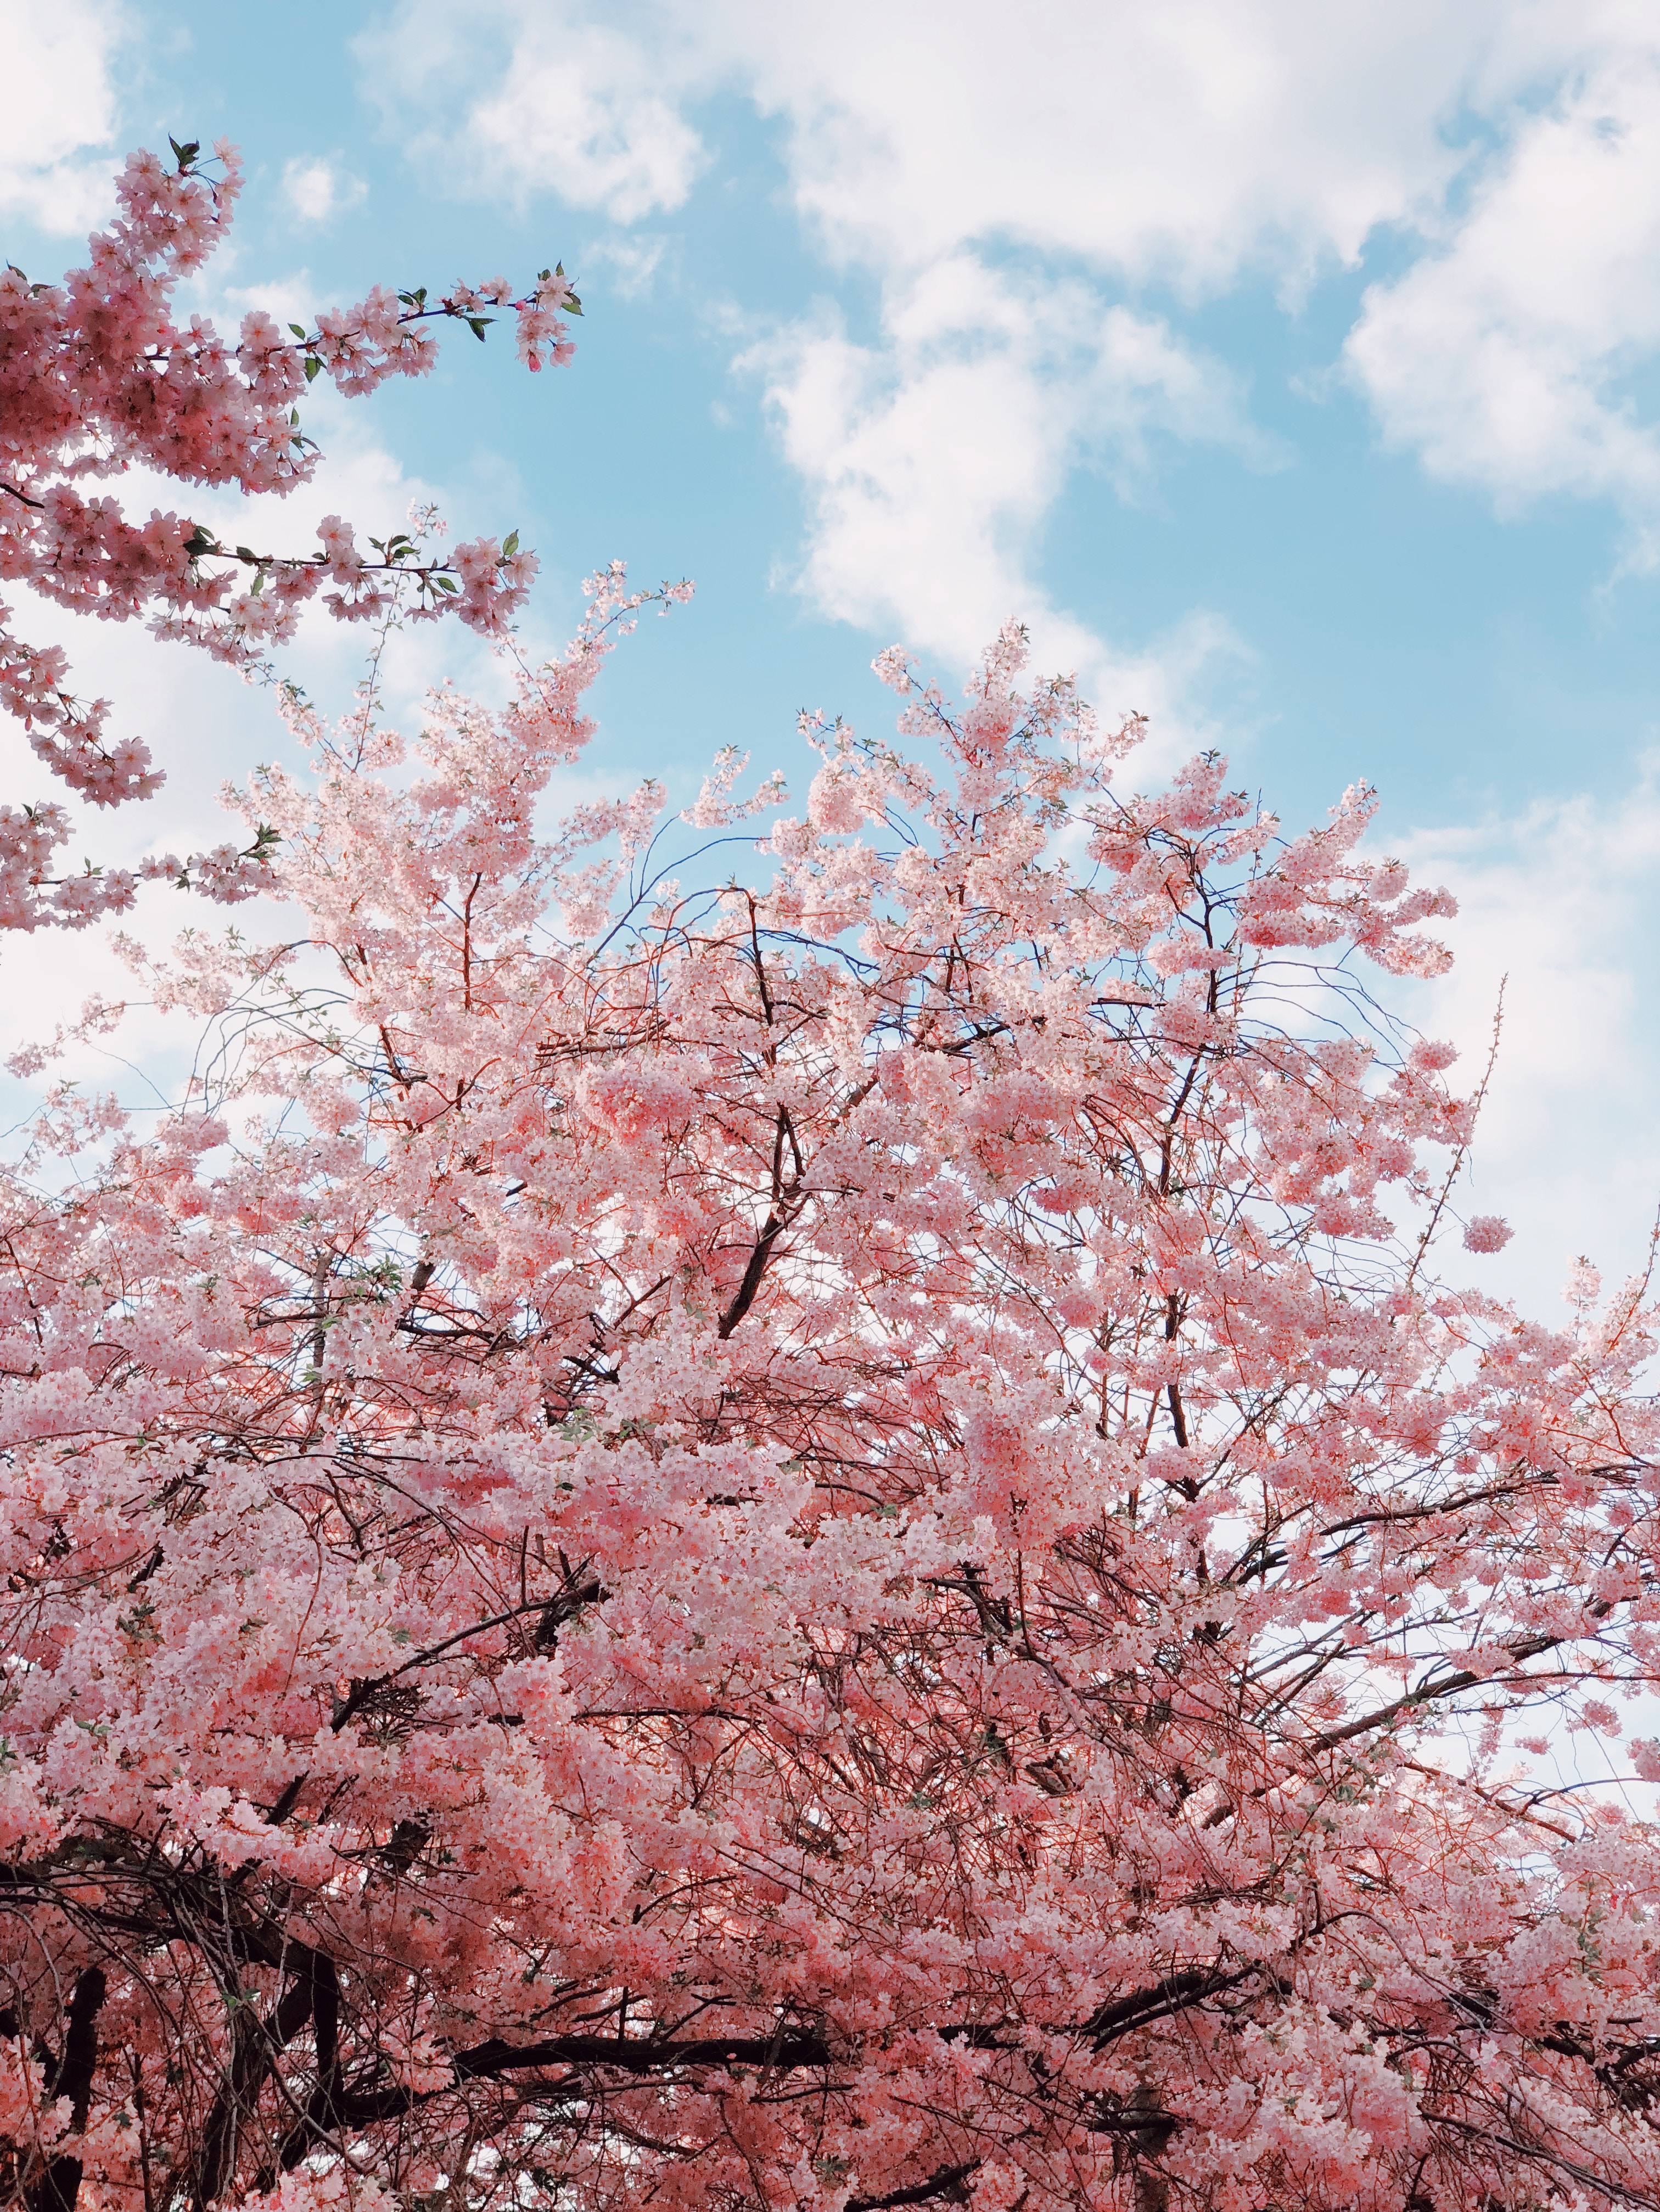 spring, flowers, sky, cherry, branches, bloom, flowering images